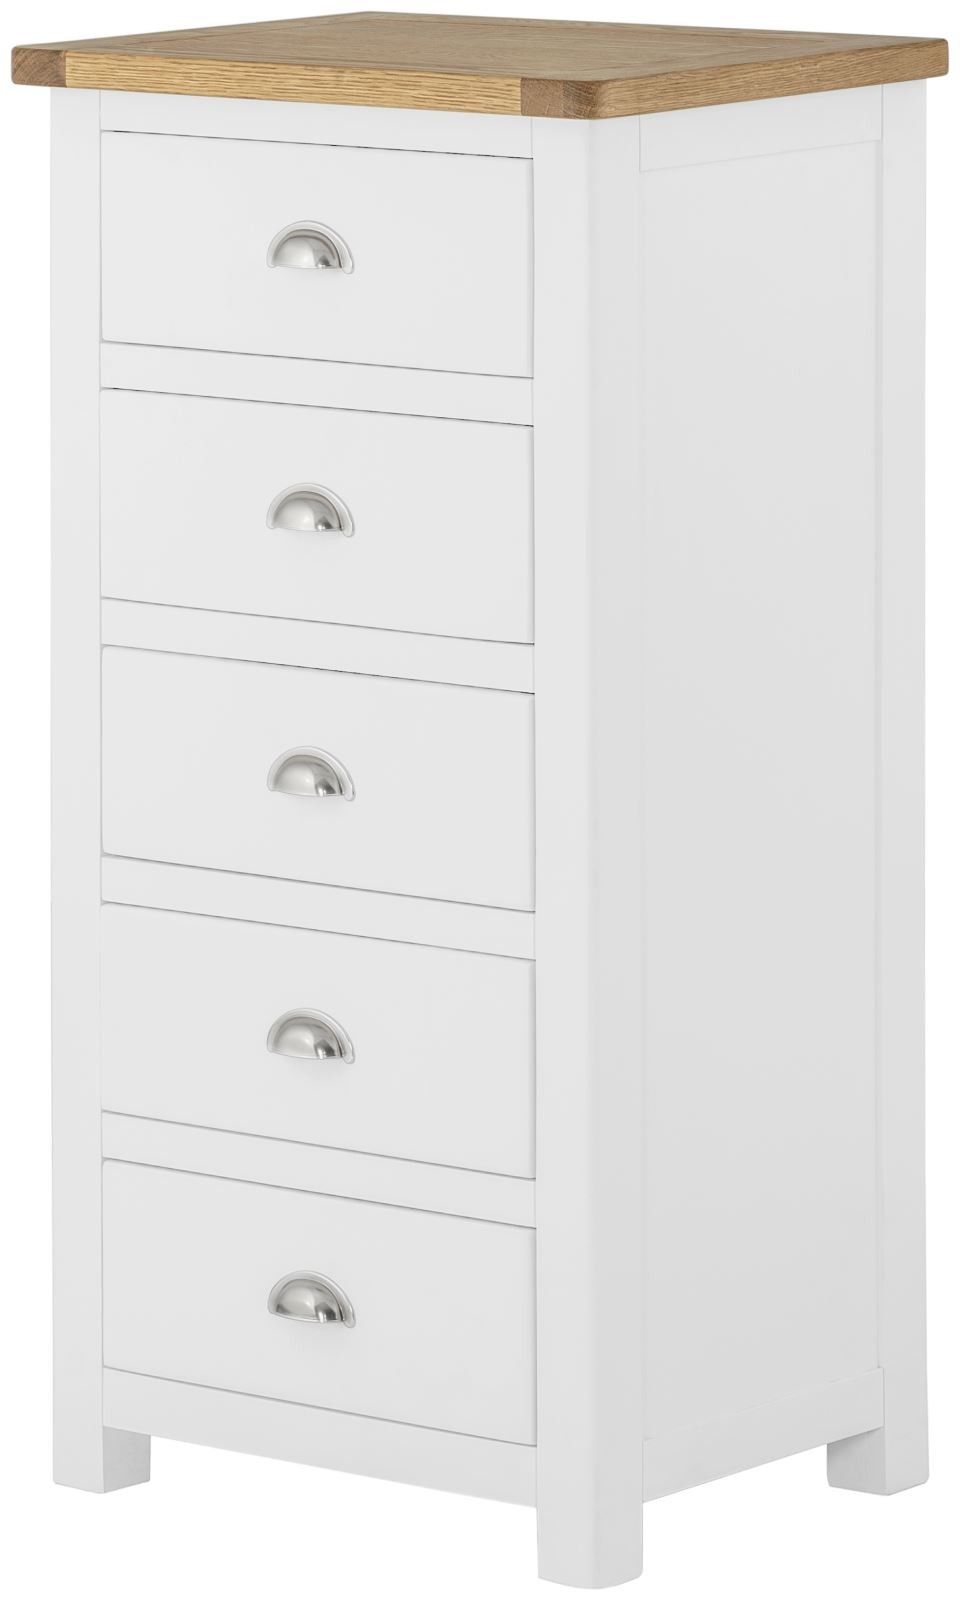 Purbeck Painted 5 Drawer Wellington Chest - White